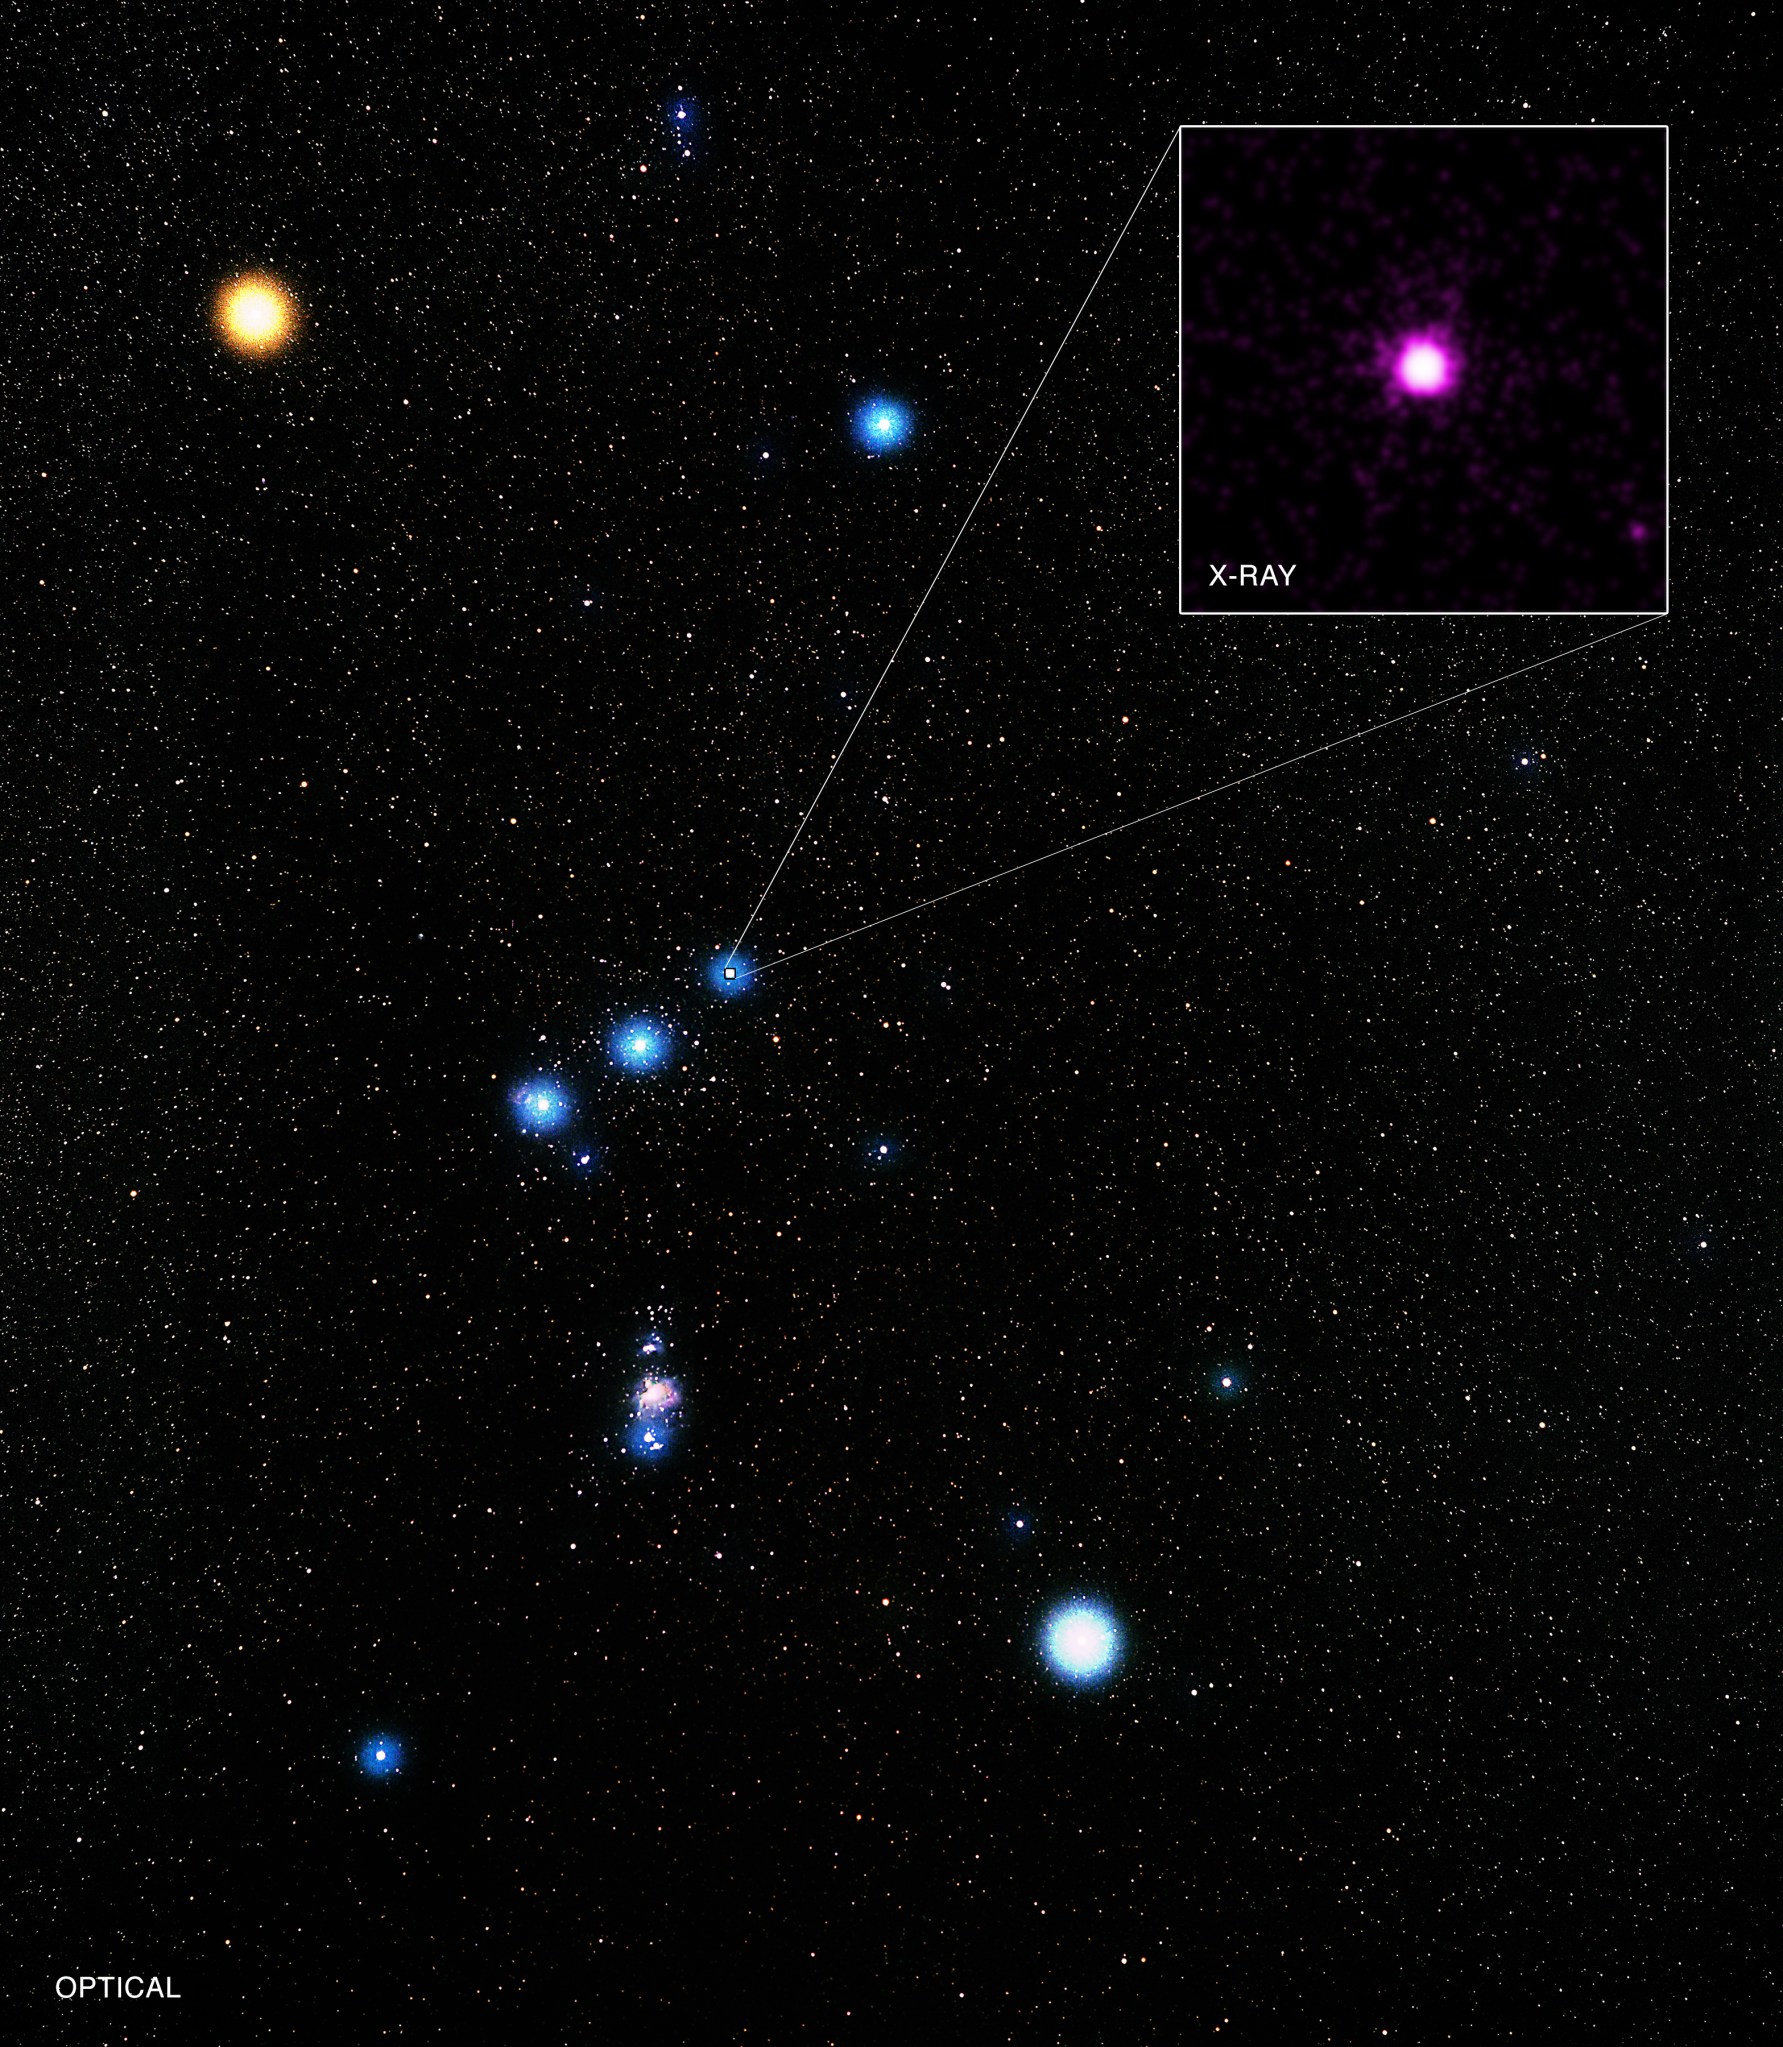 The westernmost star in Orion’s belt is known officially as Delta Orionis.